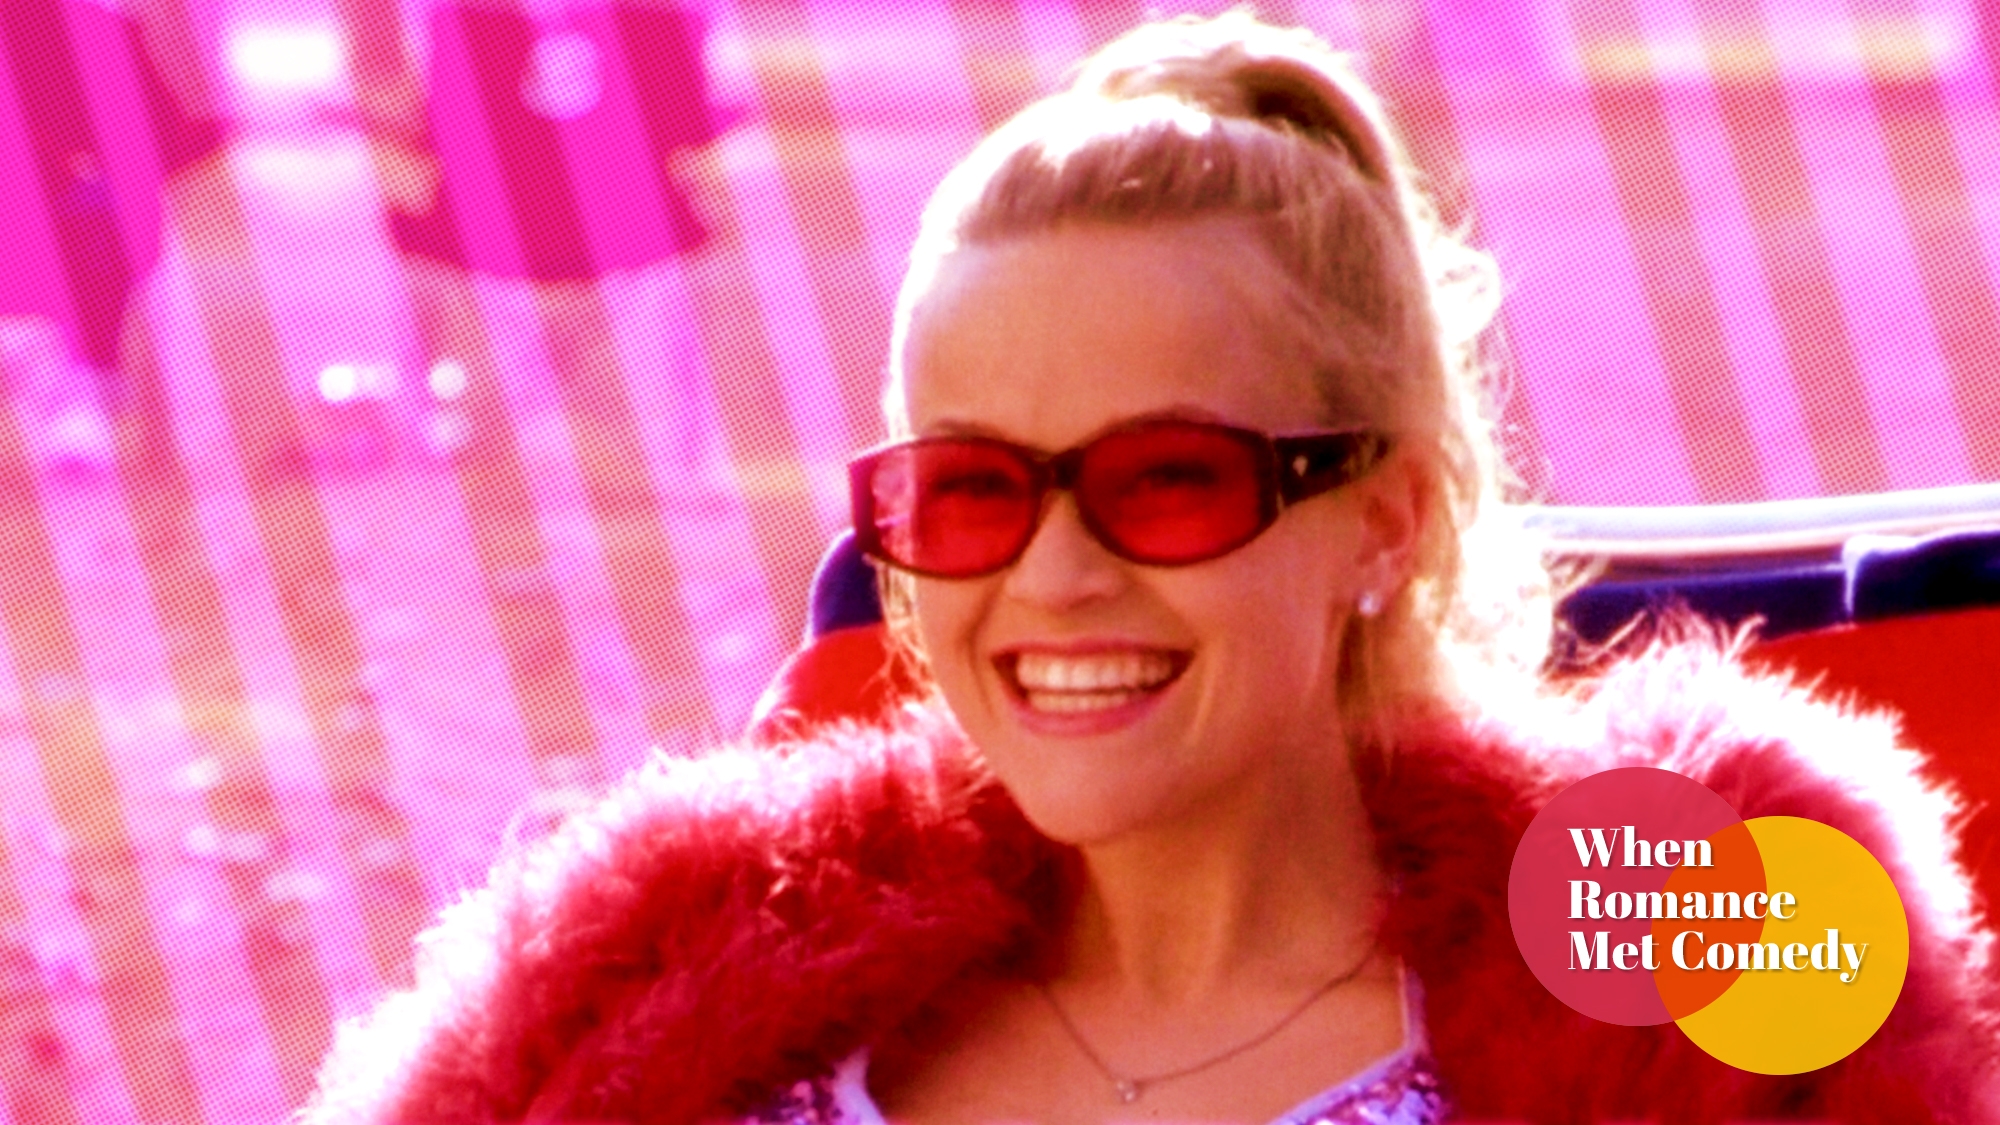 The genius of Legally Blonde has endured for 20 years